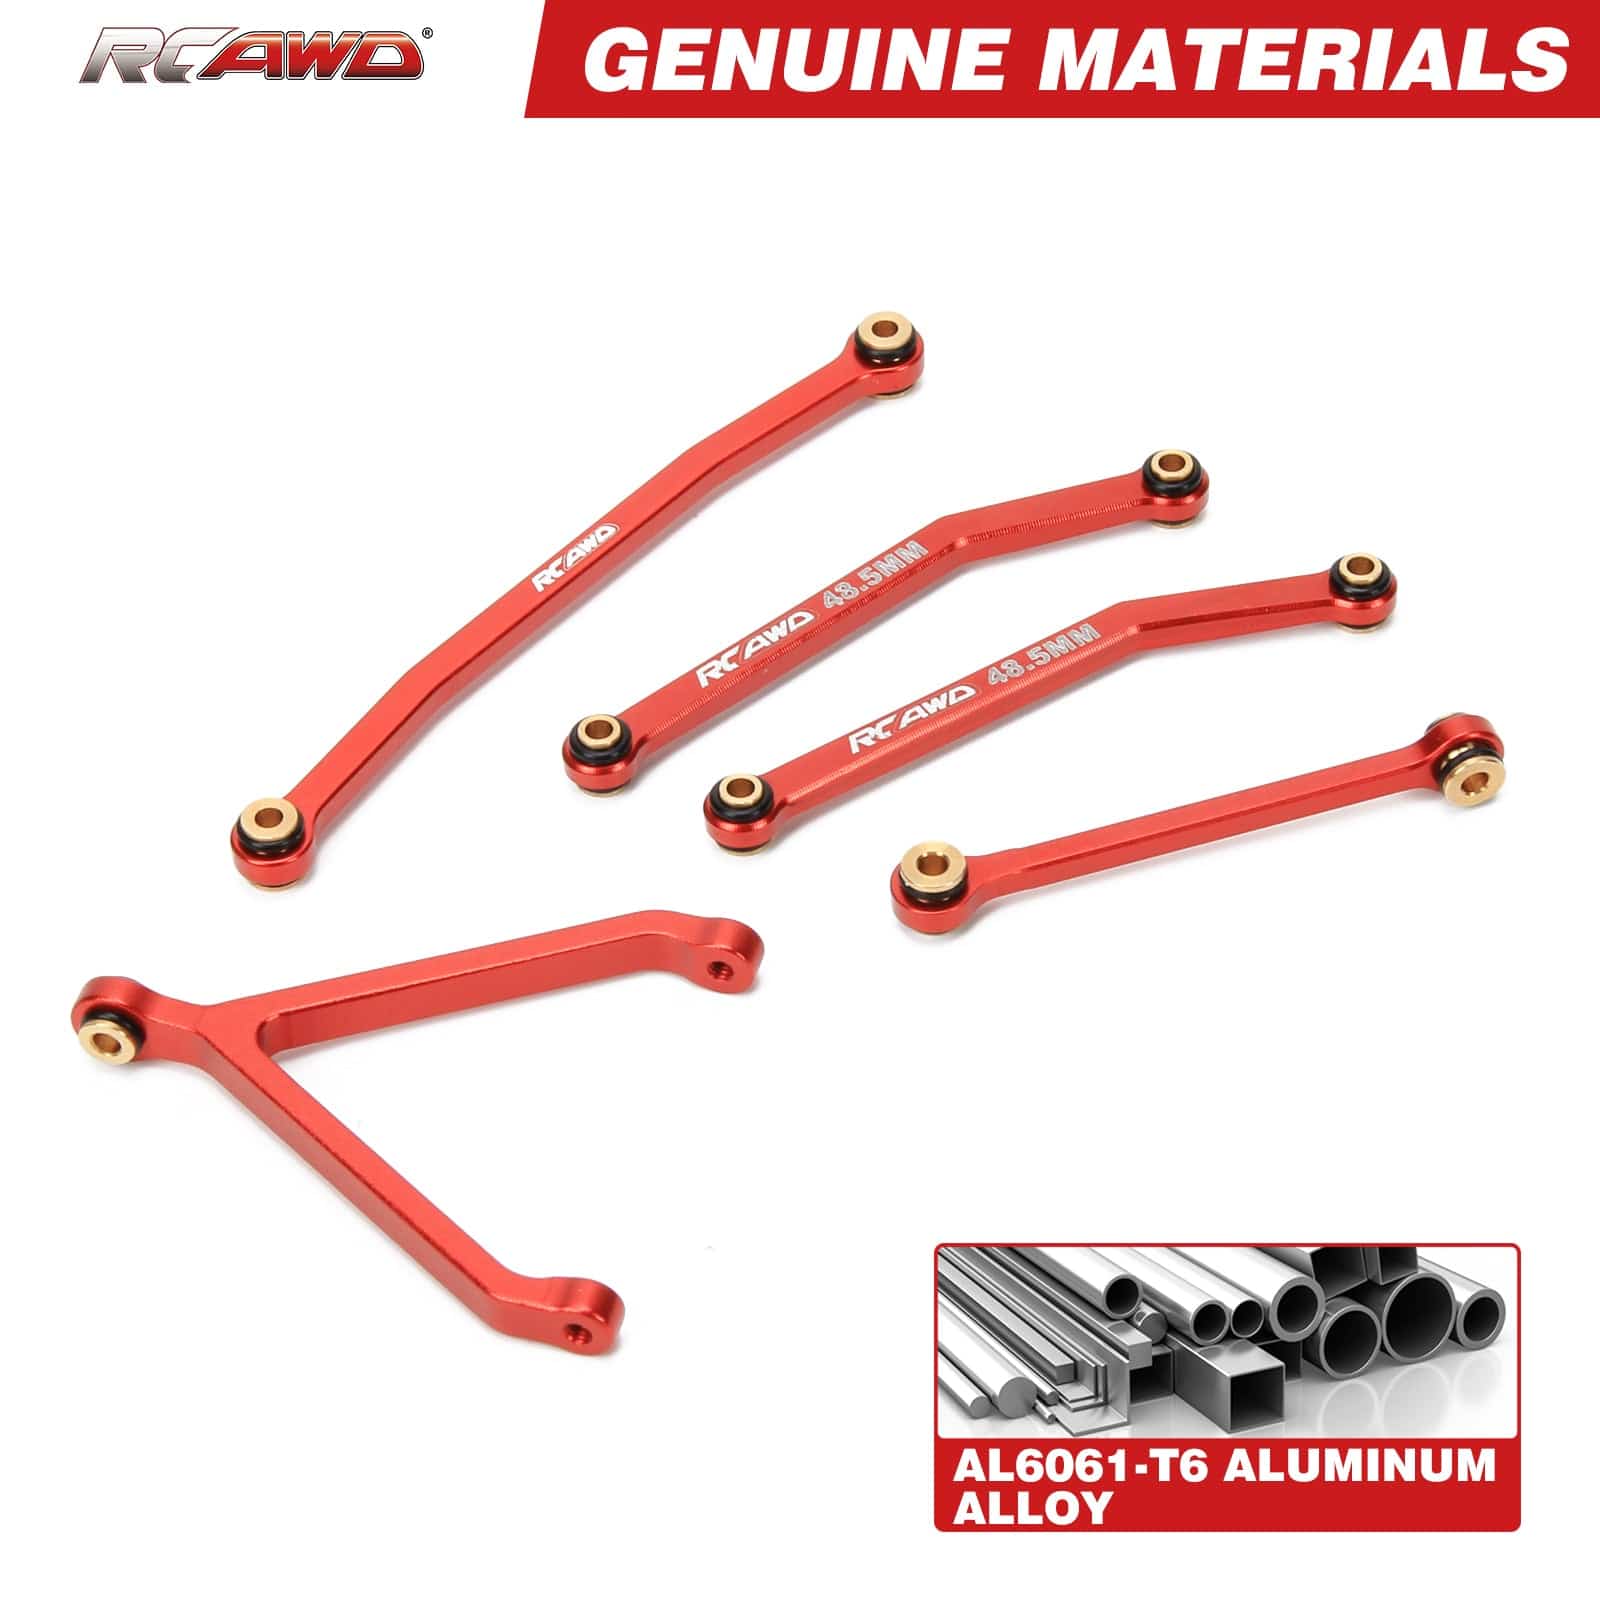 RCAWD RCAWD FMS FCX24 High Clearance Links Kit C3070,C3071